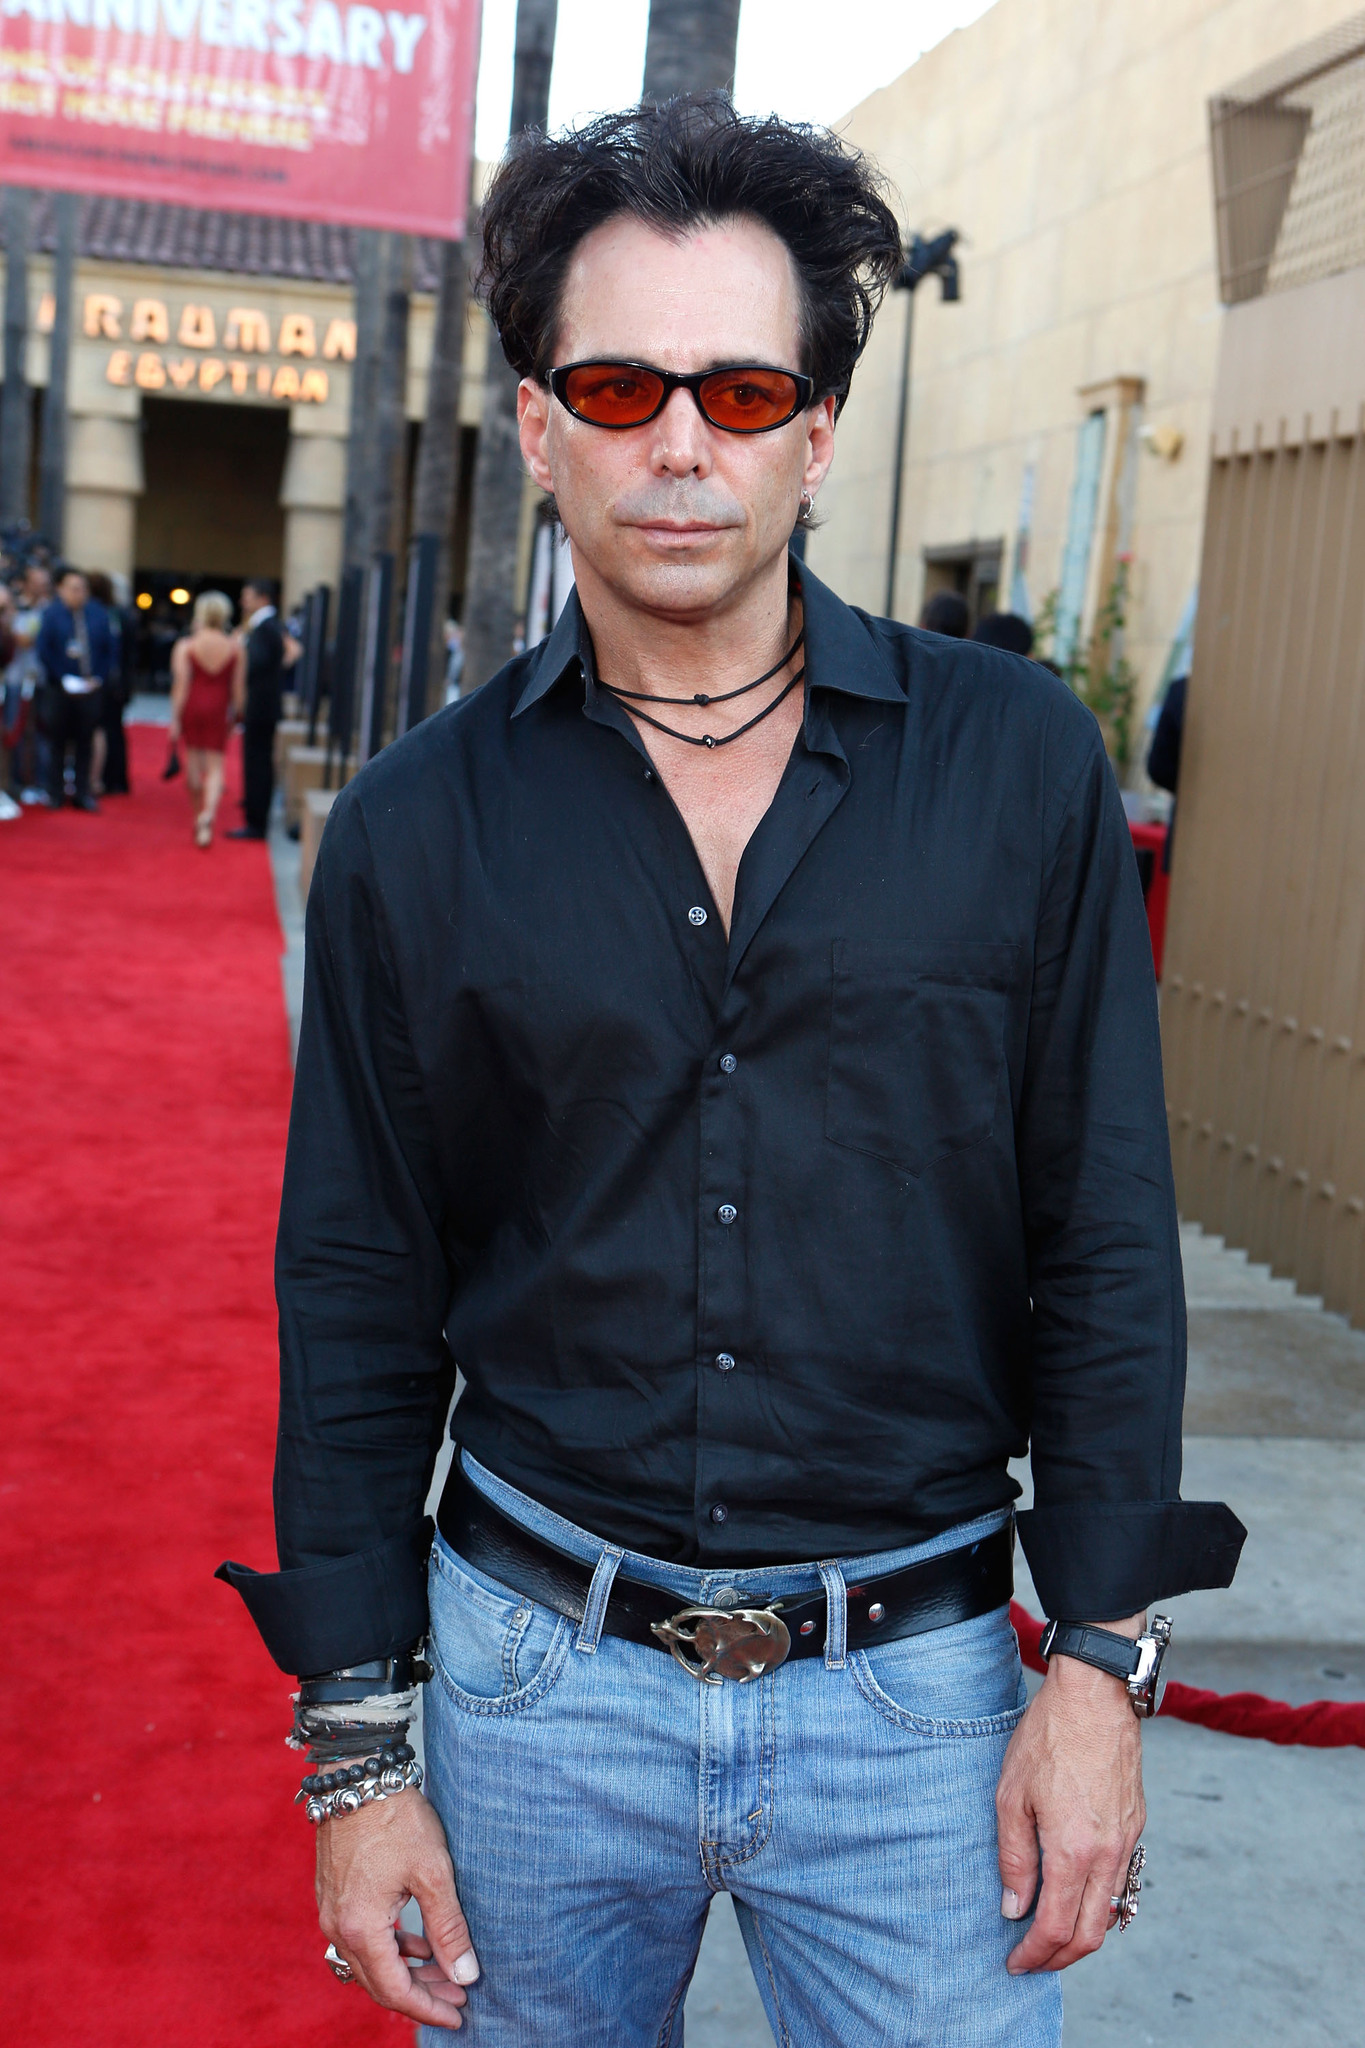 Richard Grieco at event of Rube Sparks (2012)